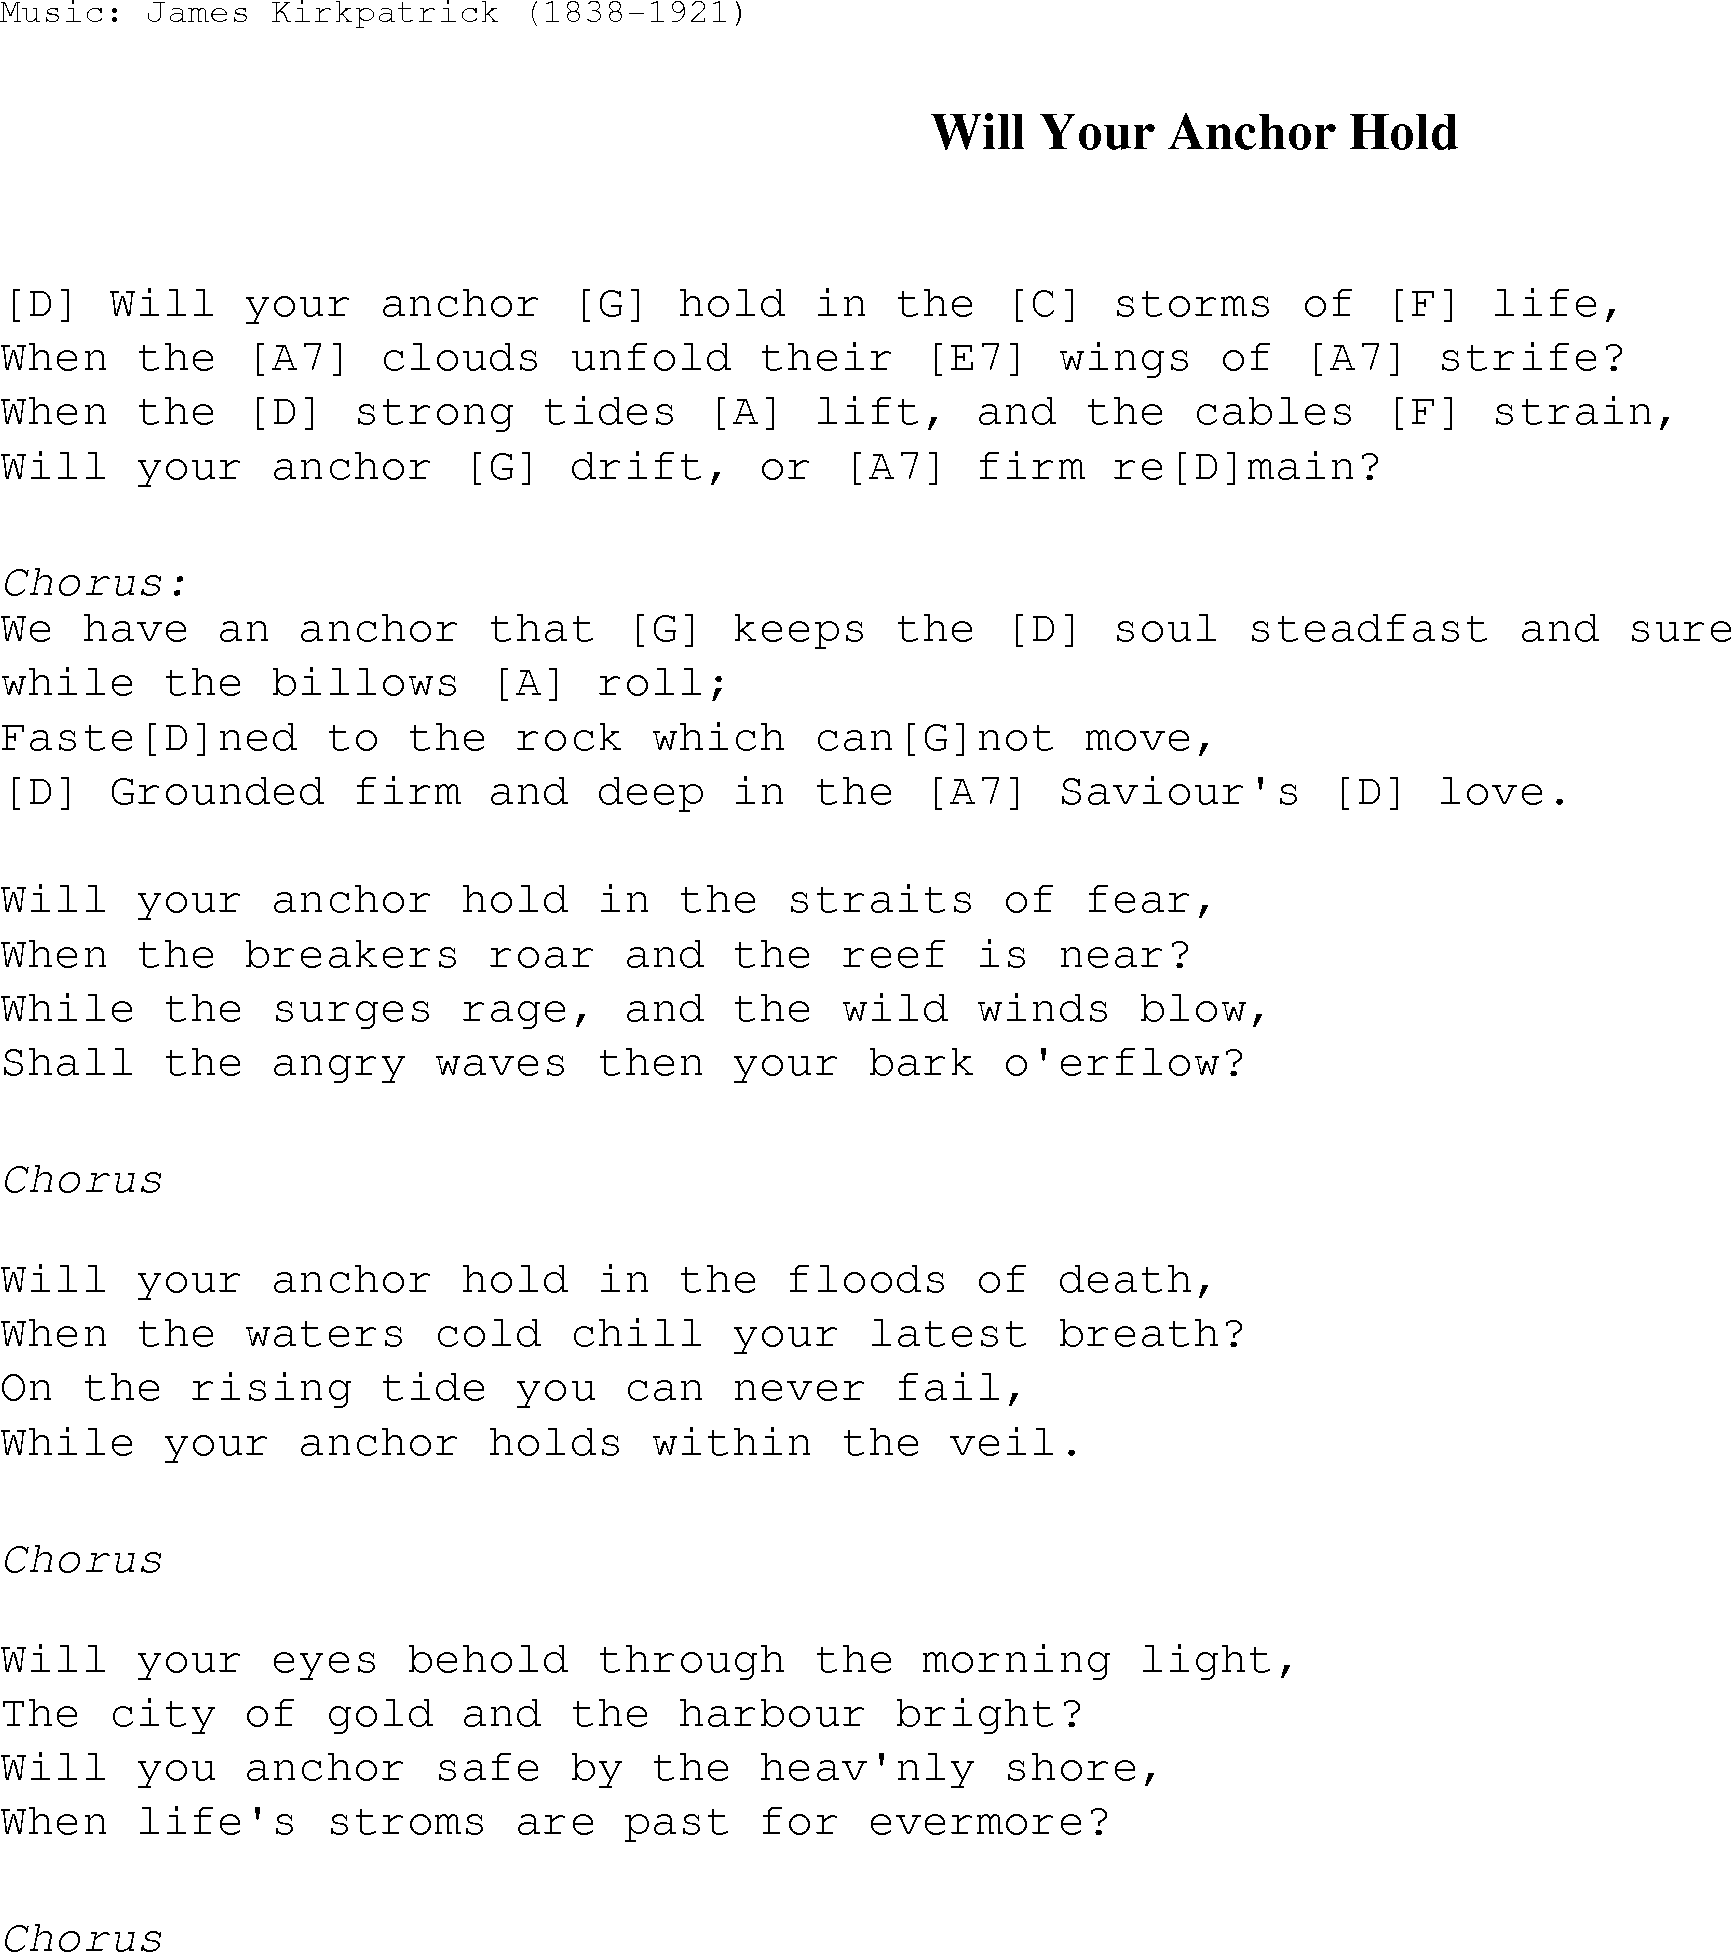 Gospel Song: will_your_anchor_hold, lyrics and chords.